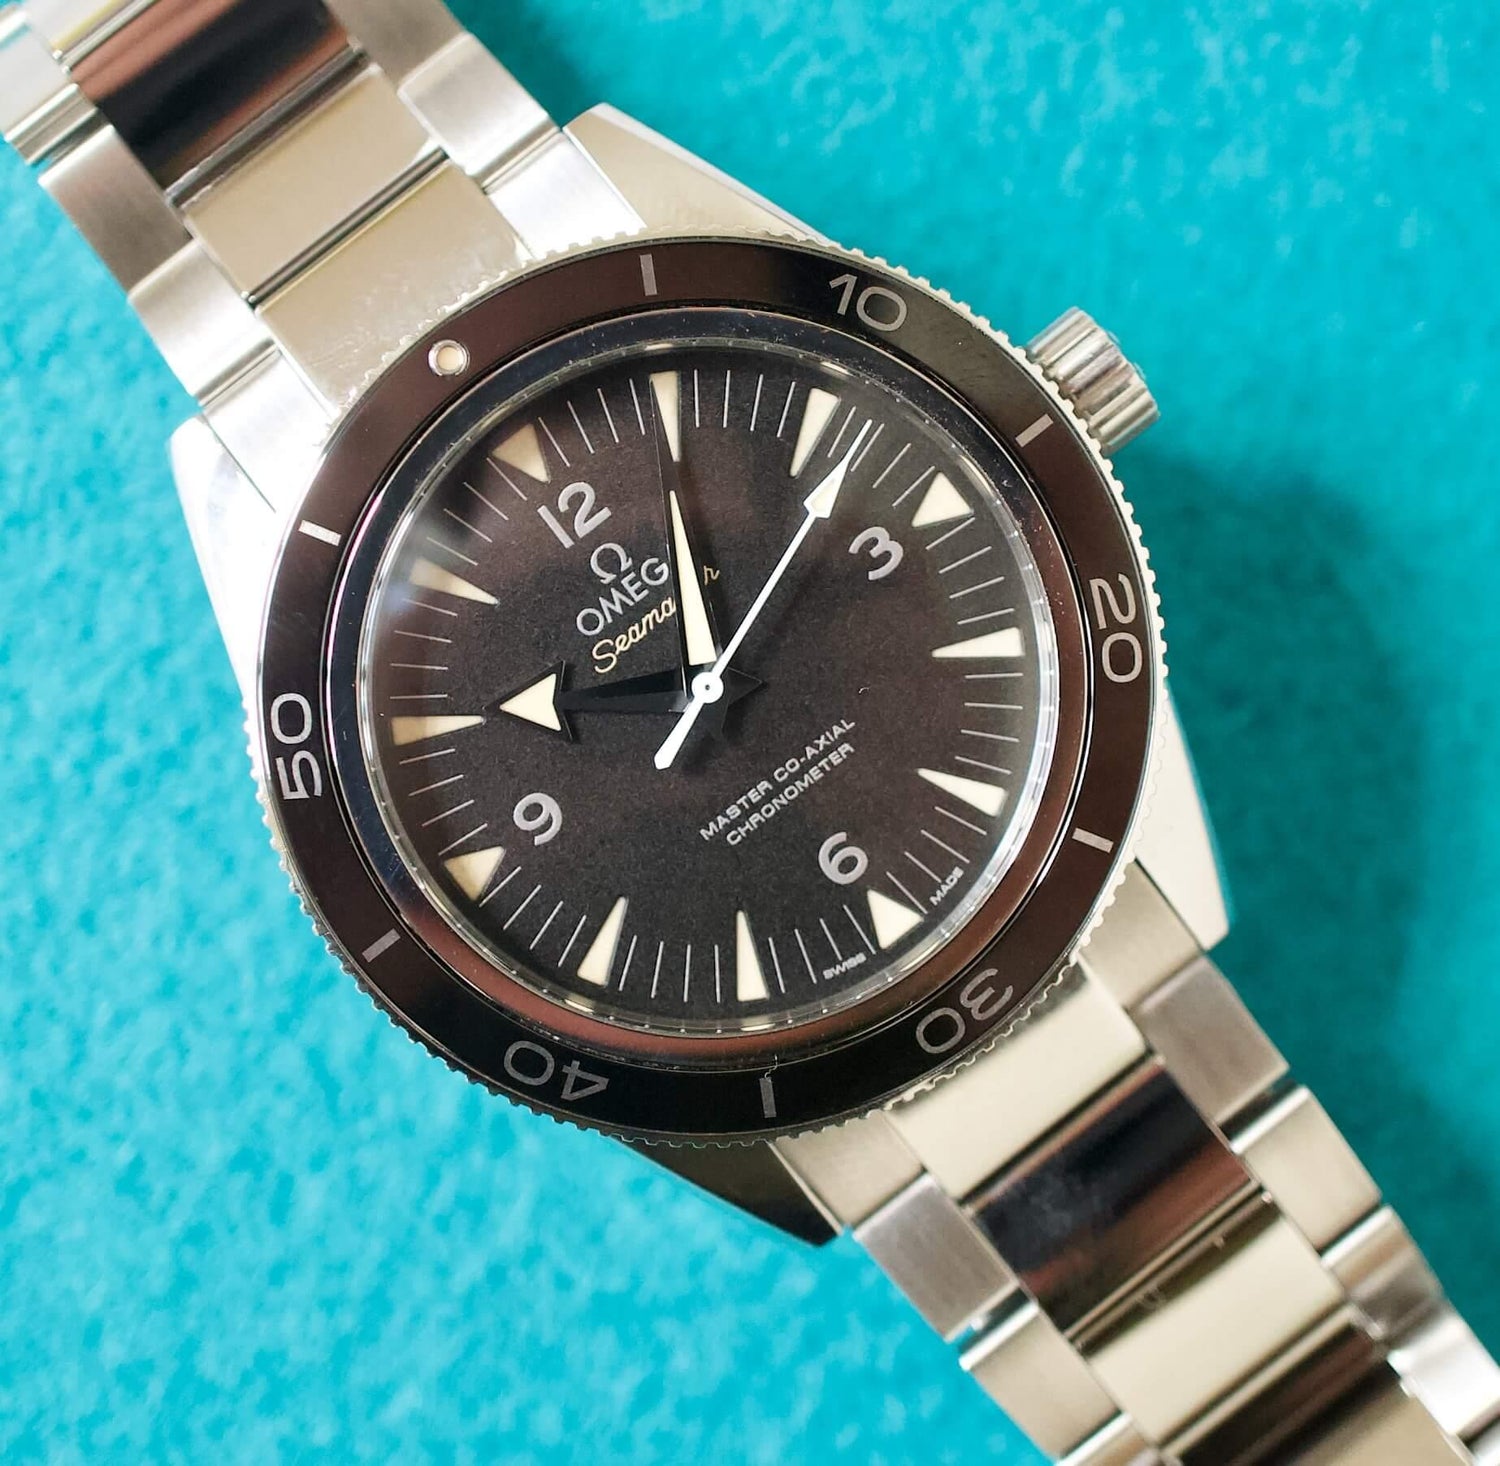 SOLD OUT: Omega Seamaster 300m Liquidmetal 233.30.41.21.01.001 41MM Co-Axial Black Steel Box and Pictogram Card 2019 - WearingTime Luxury Watches